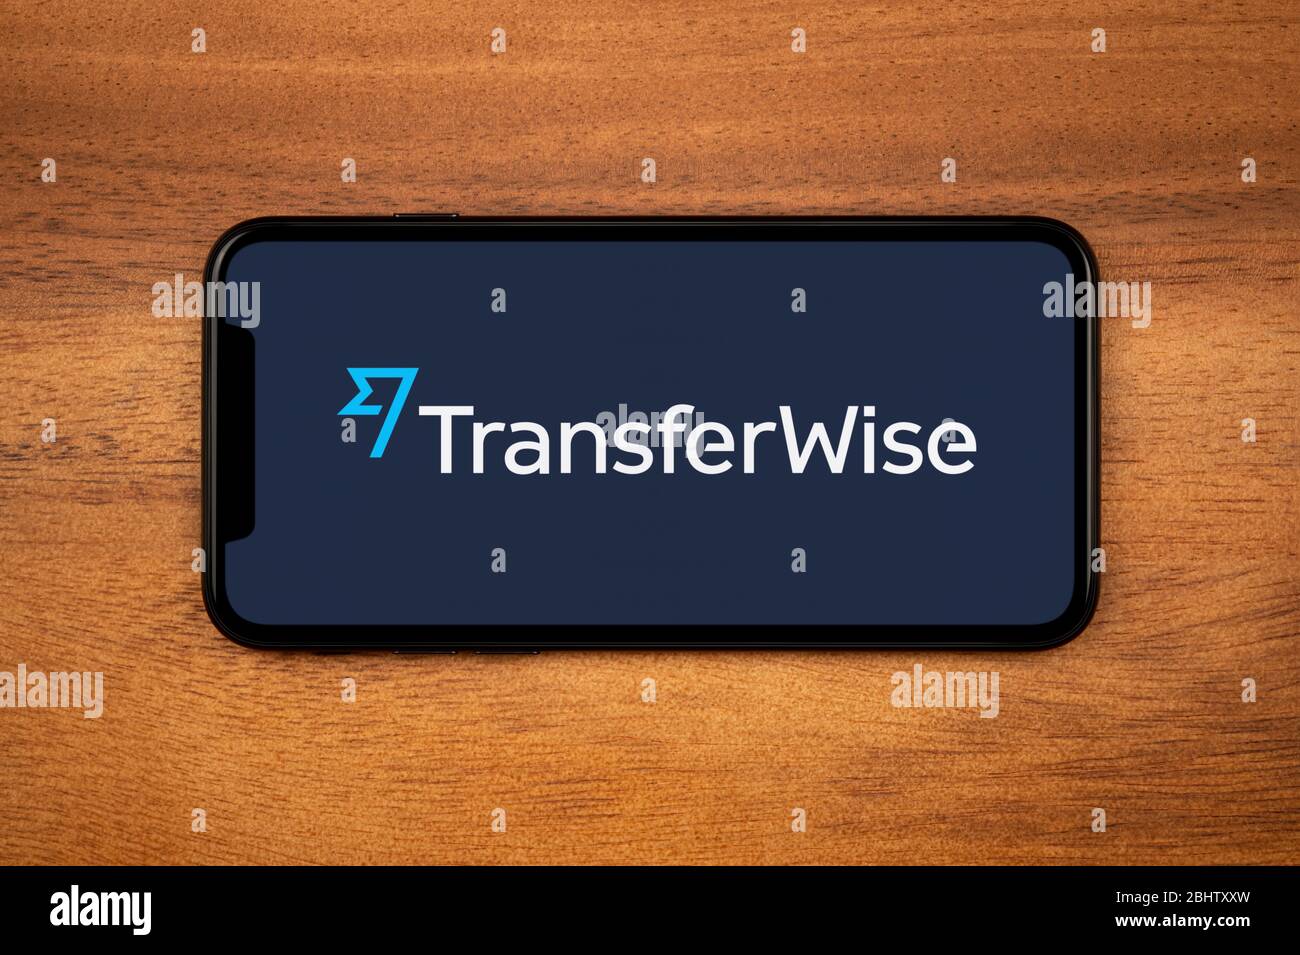 A smartphone showing the Transferwise logo rests on a plain wooden table (Editorial use only). Stock Photo